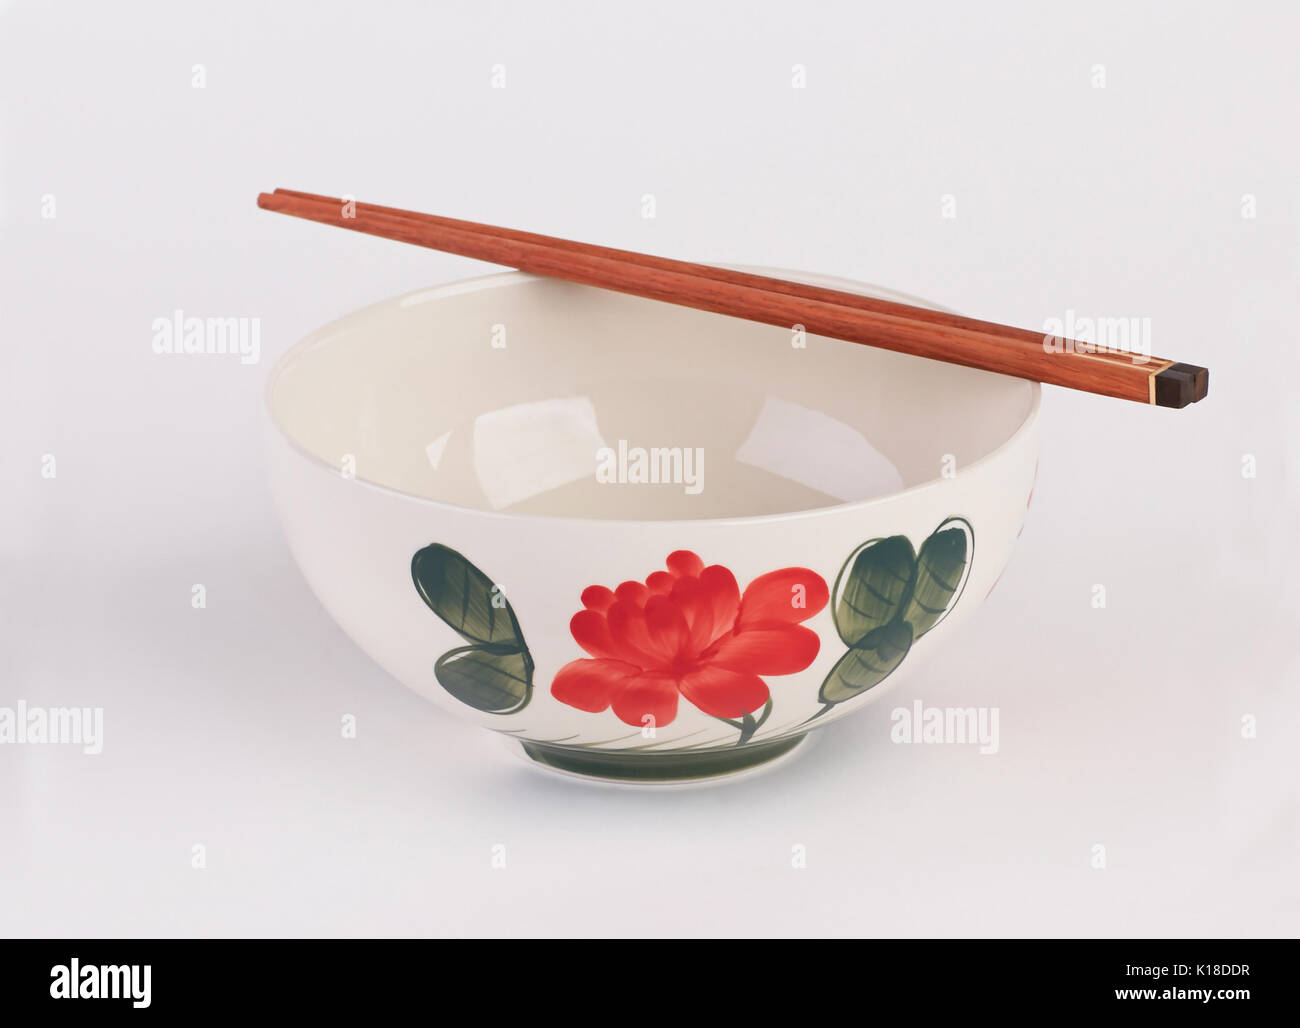 Hand painted ceramic soup bowl with wooden chopsticks isolated on white background Stock Photo